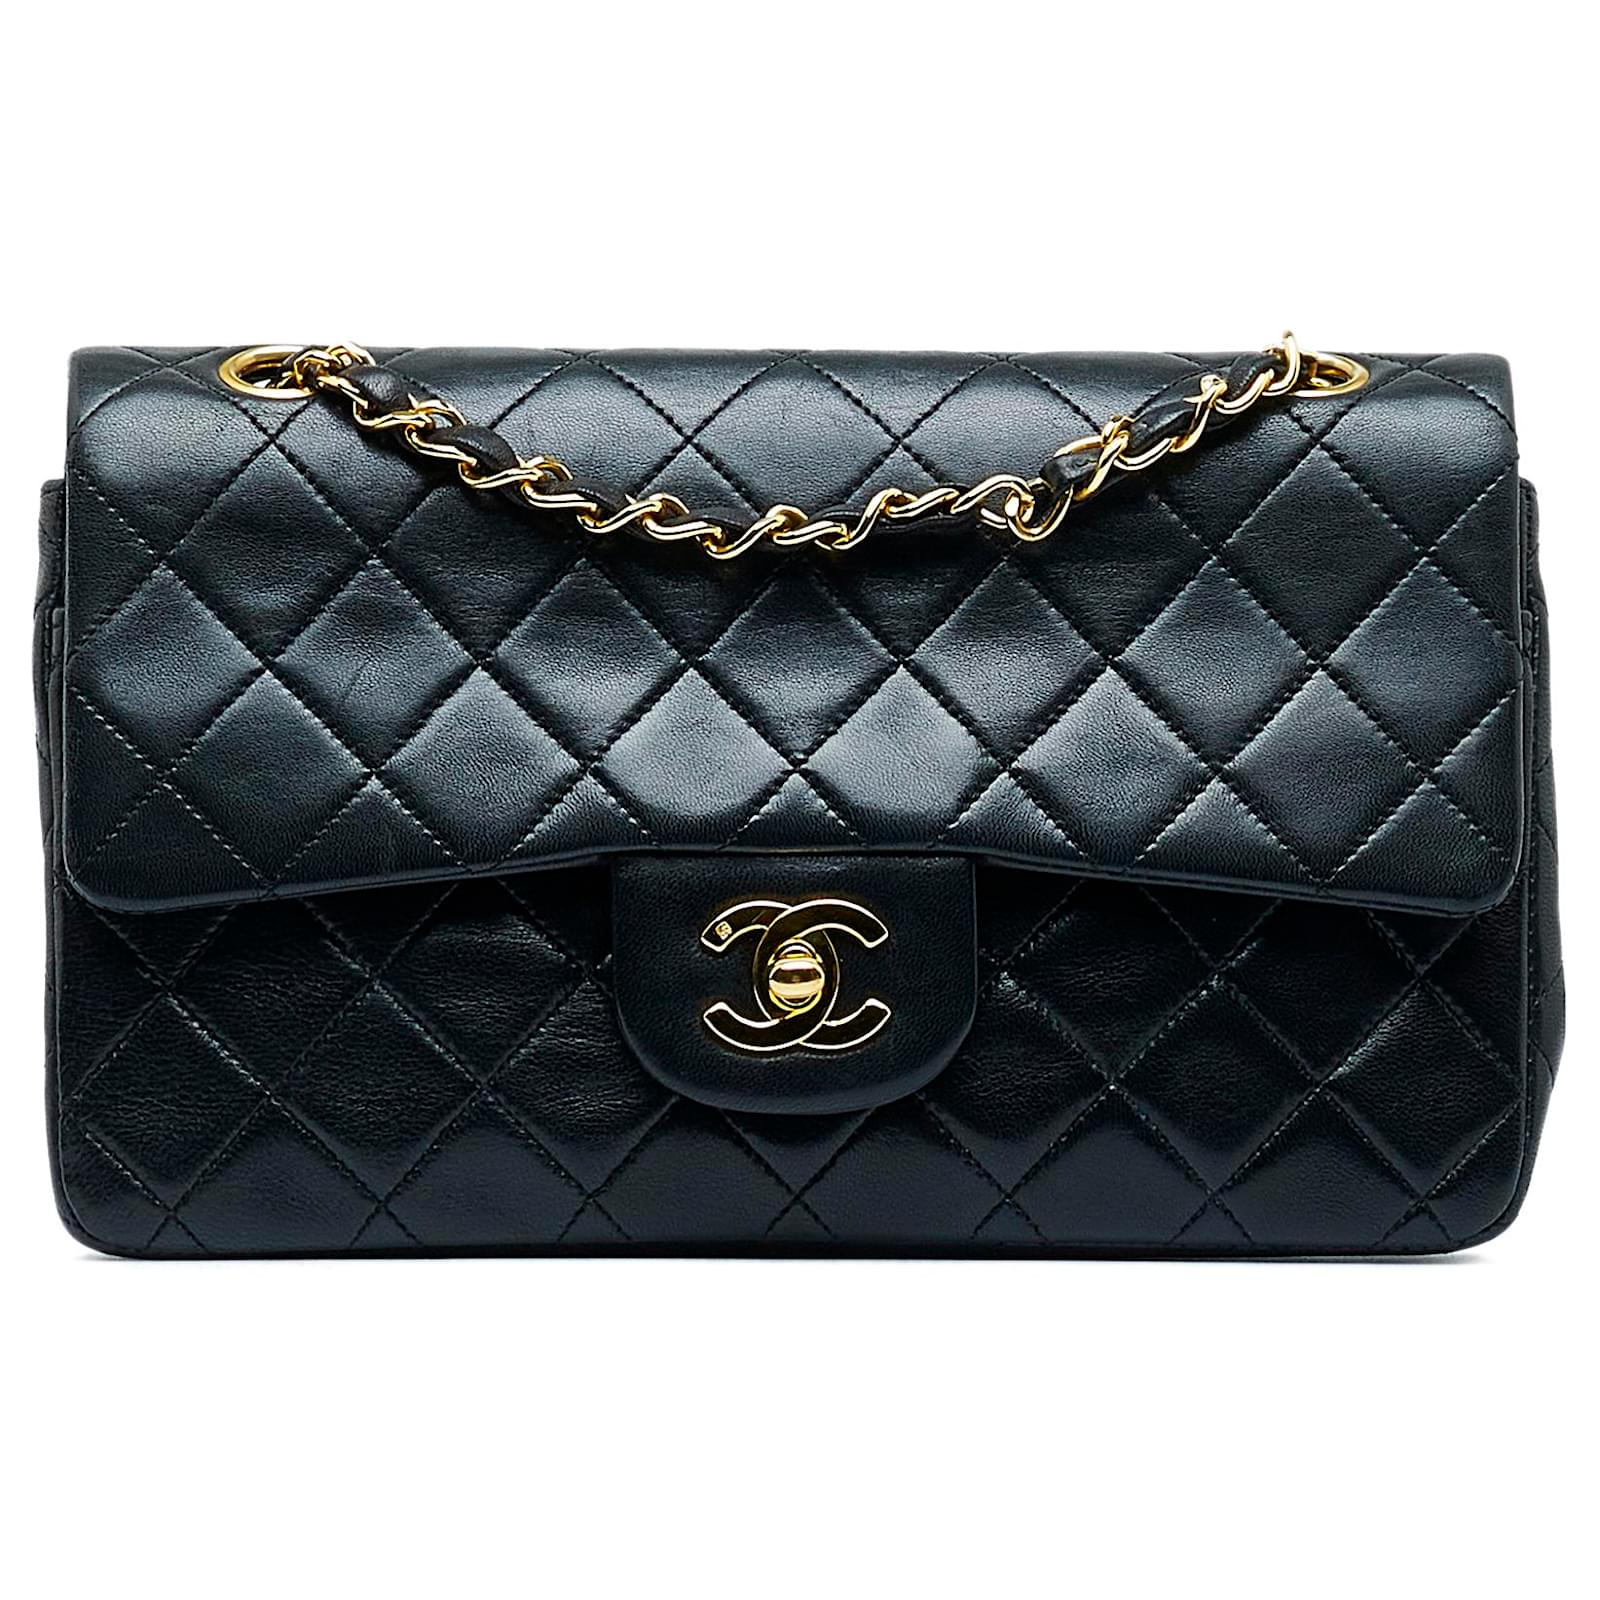 Chanel Black Quilted Caviar Leather Small Classic Wallet Chanel